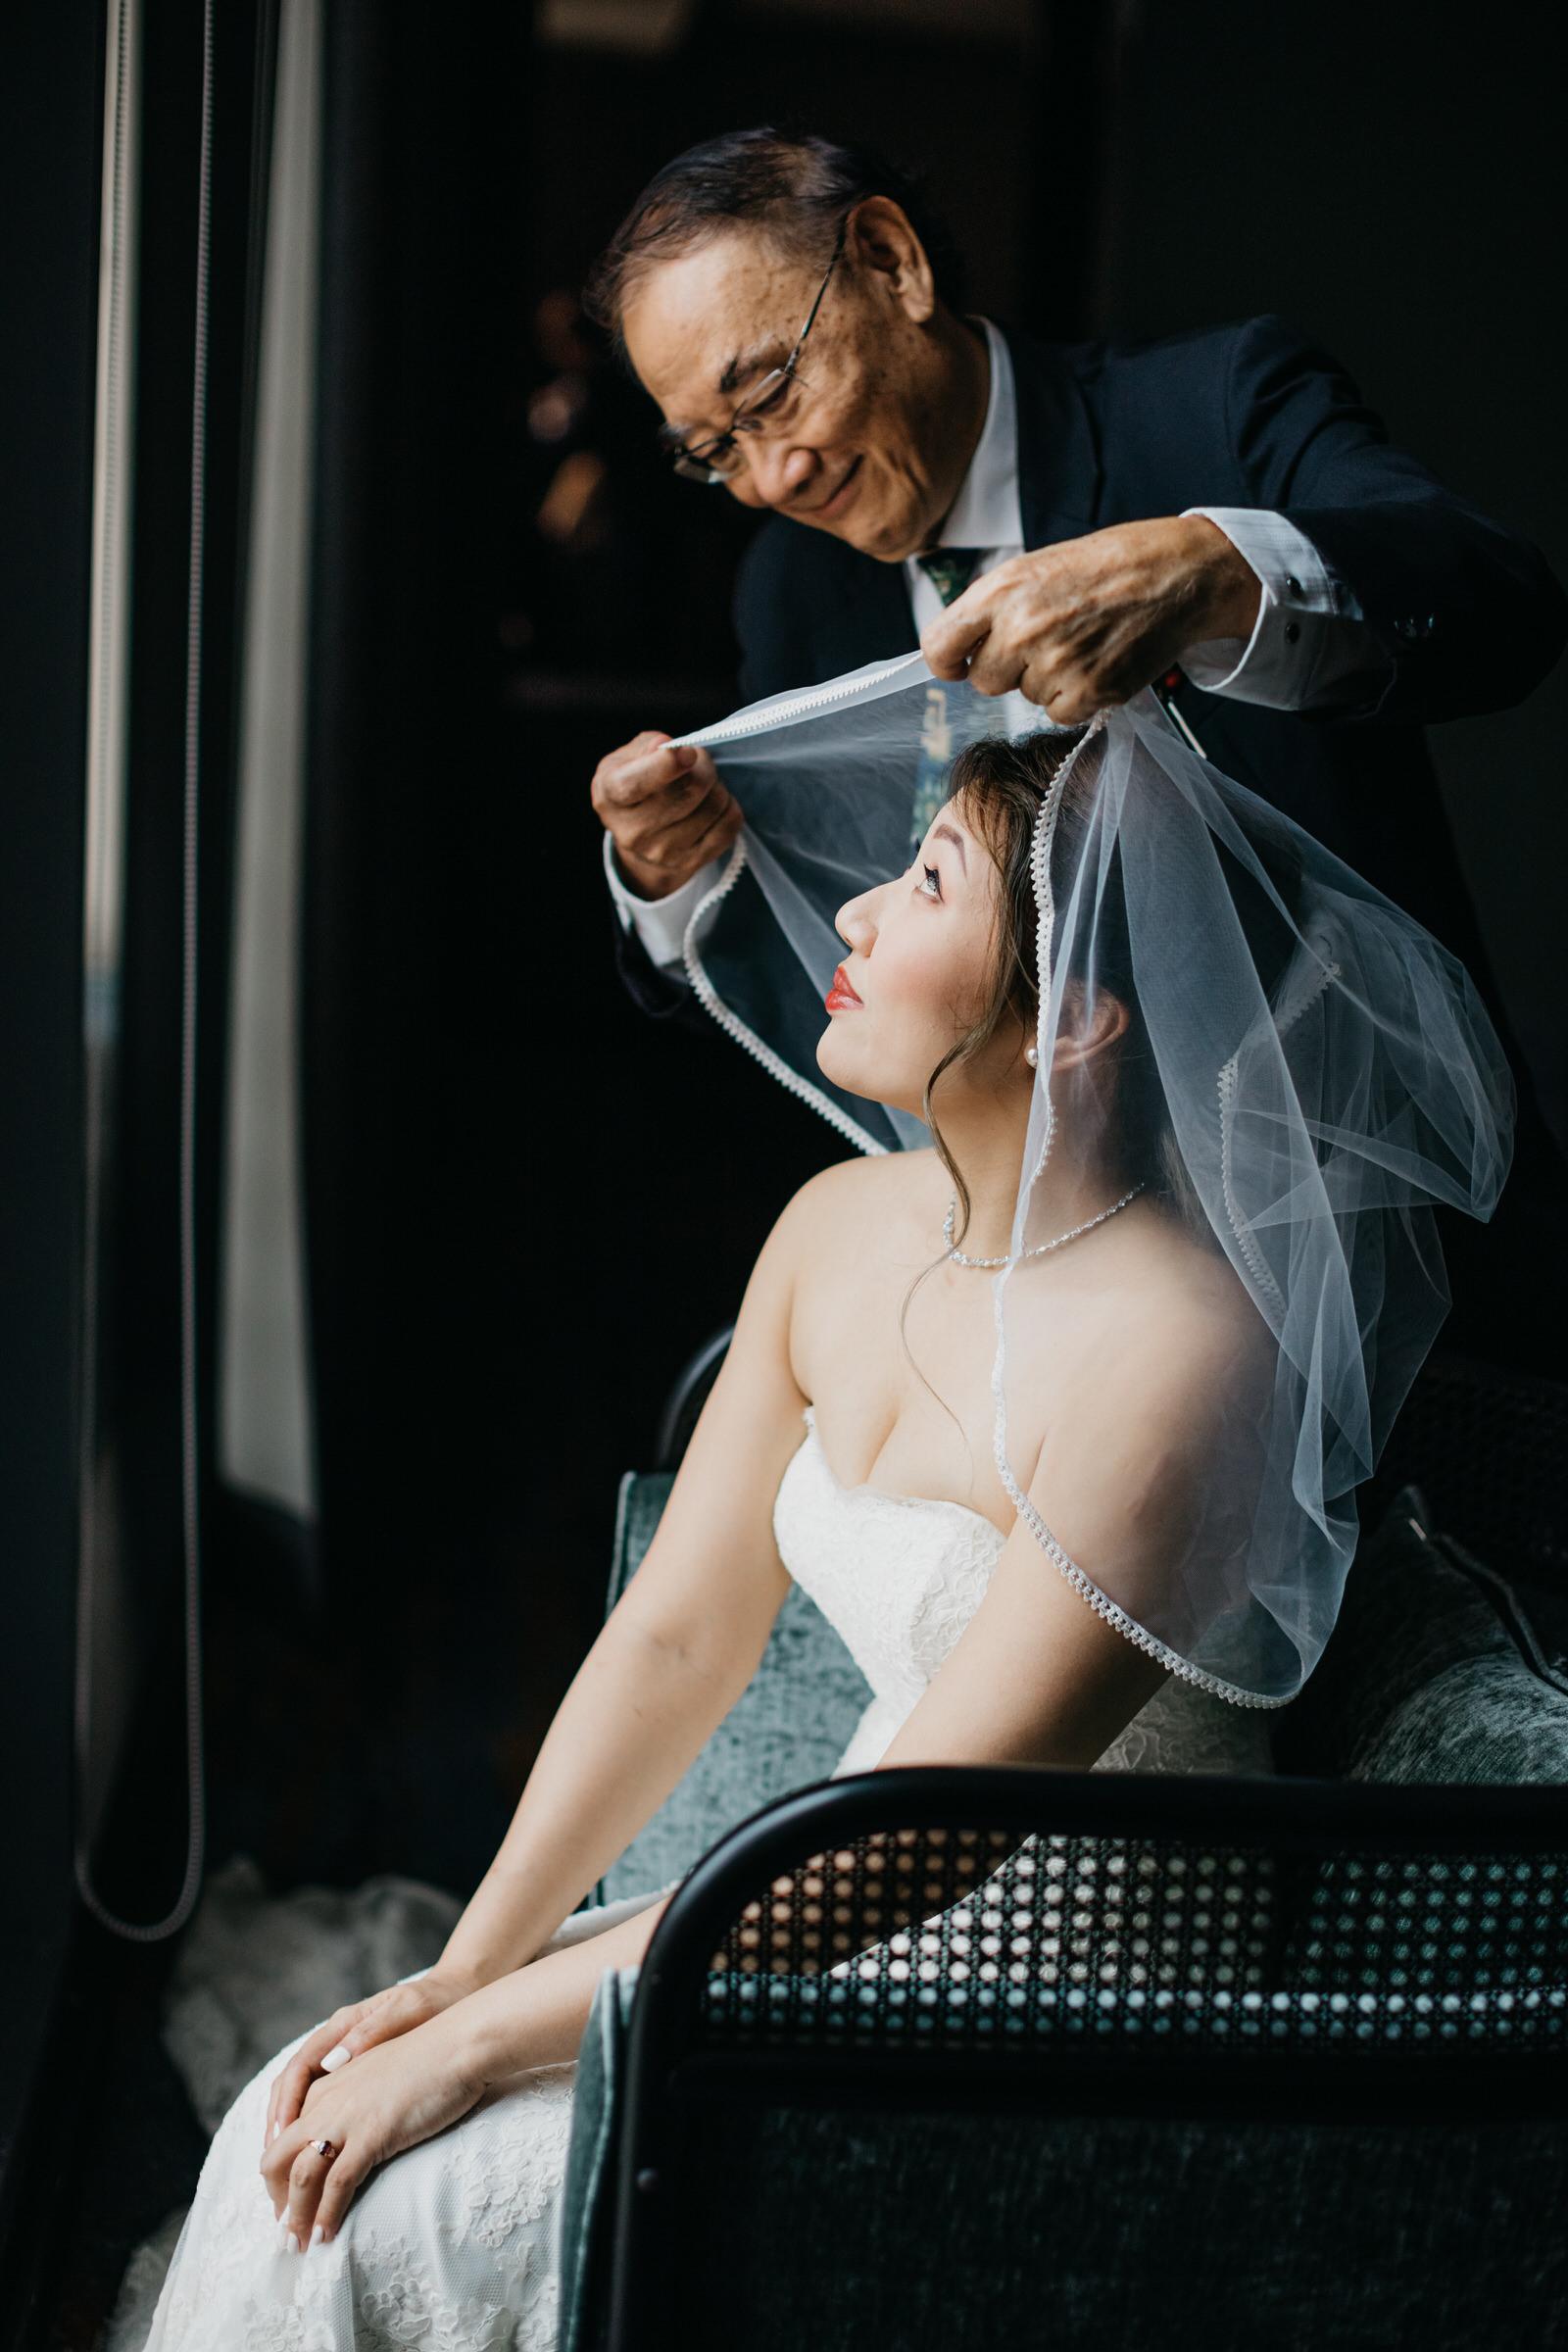 A Rooftop Poolside Wedding at Hotel Stripes Kuala Lumpur MCO2.0 Cliff Choong Photography Malaysia Covid19 ROM Bride Make Up Getting Ready